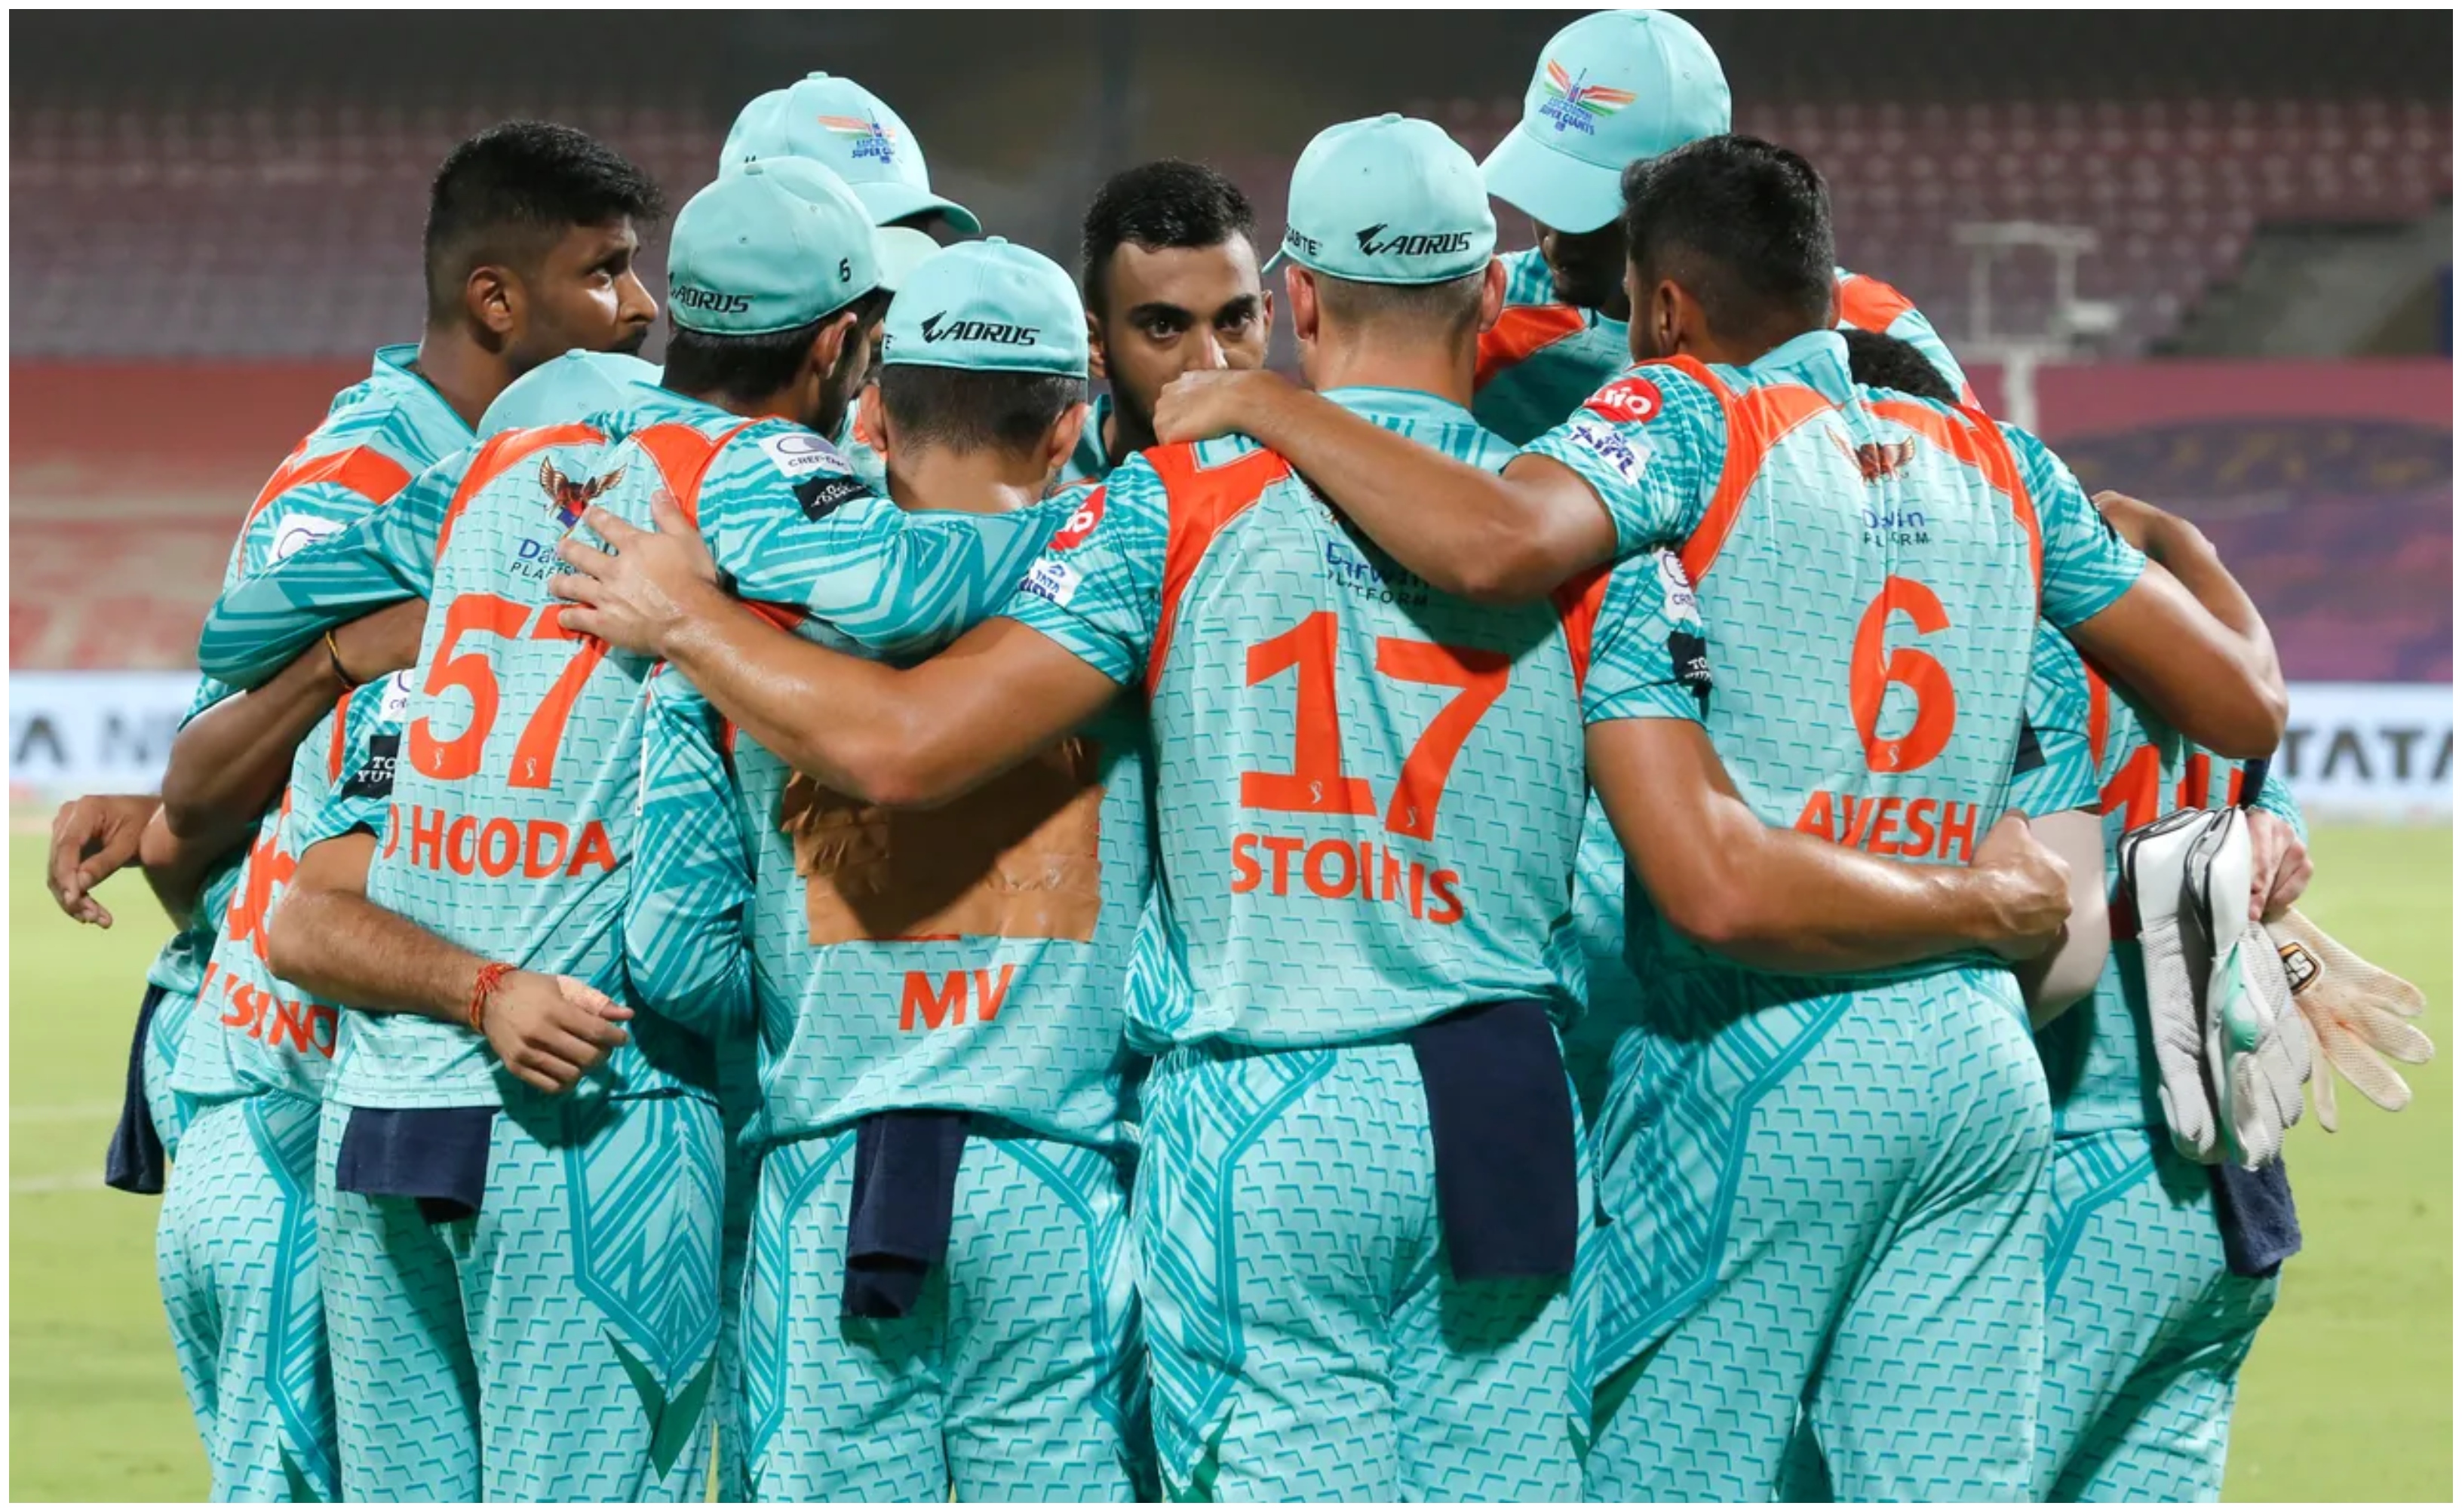 LSG qualified for the playoffs | BCCI/IPL